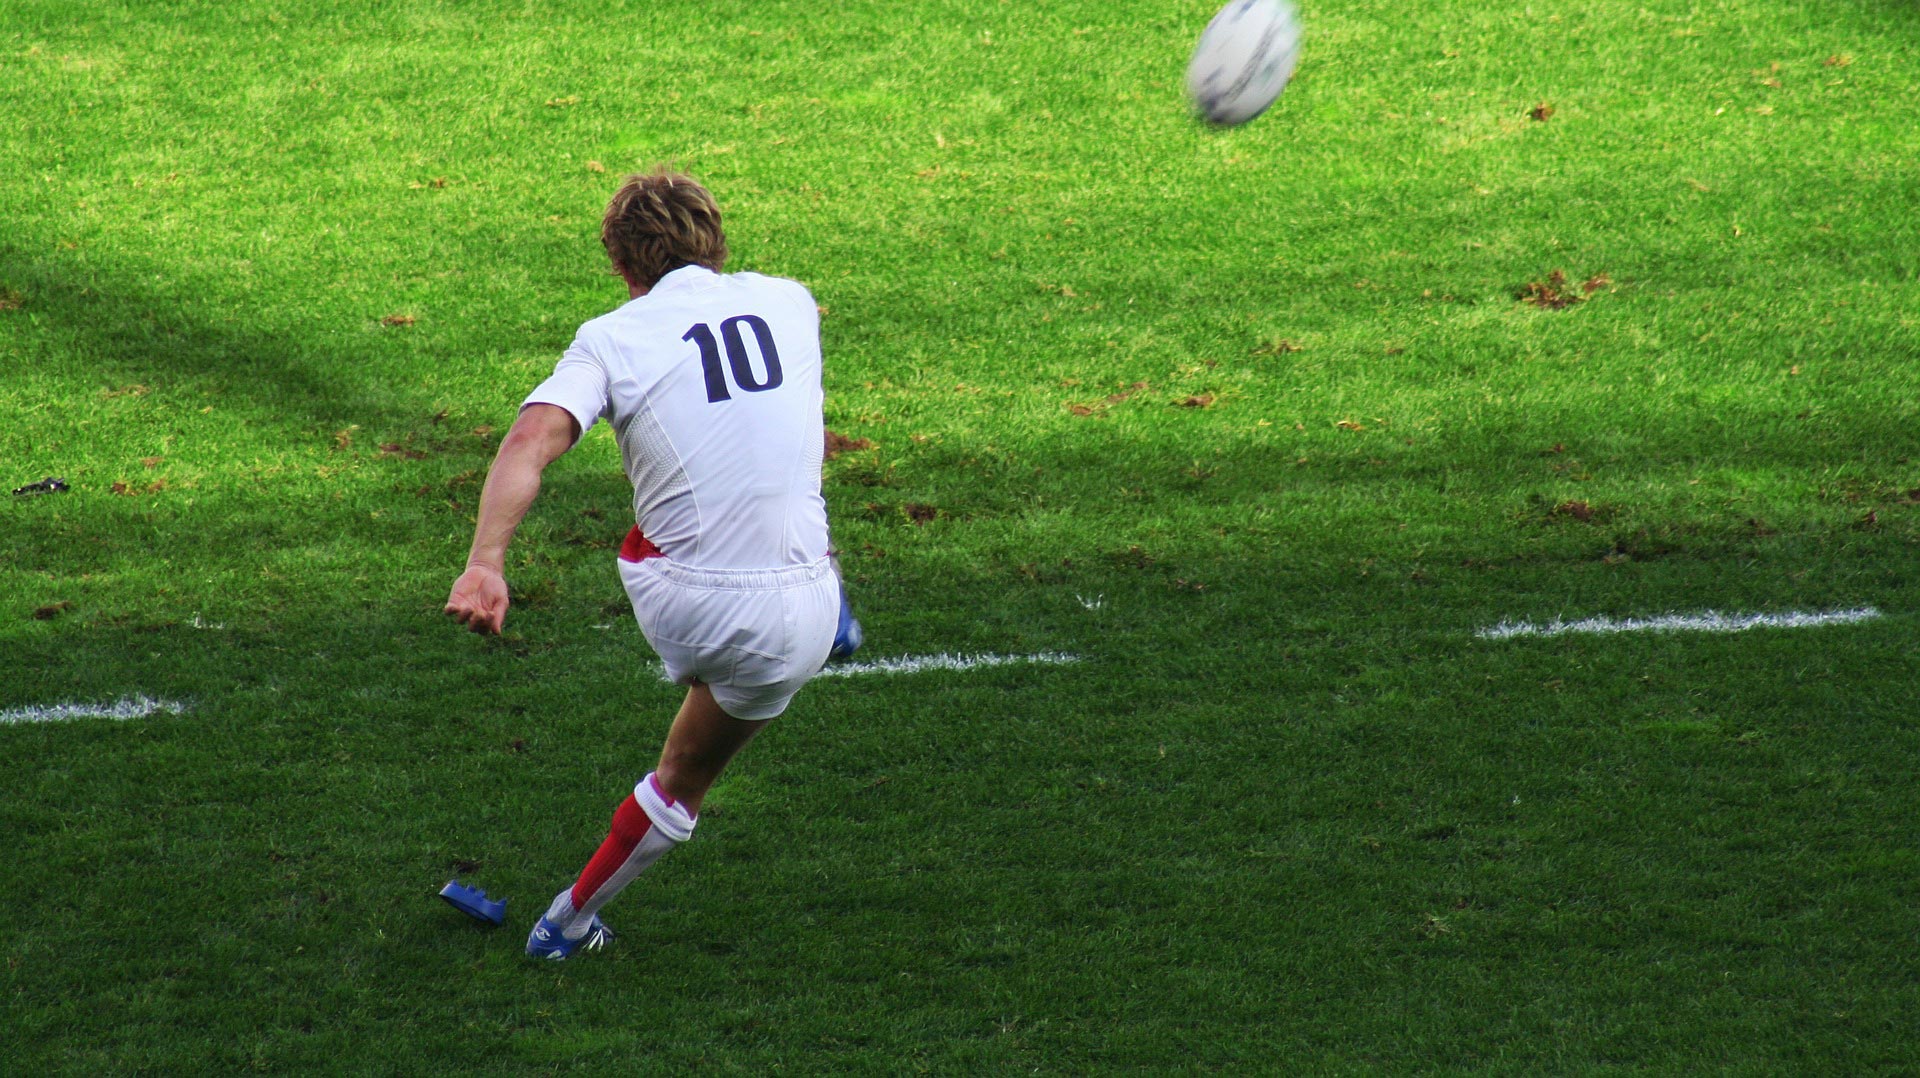 Rugby world cup 2019 injuries and prevention